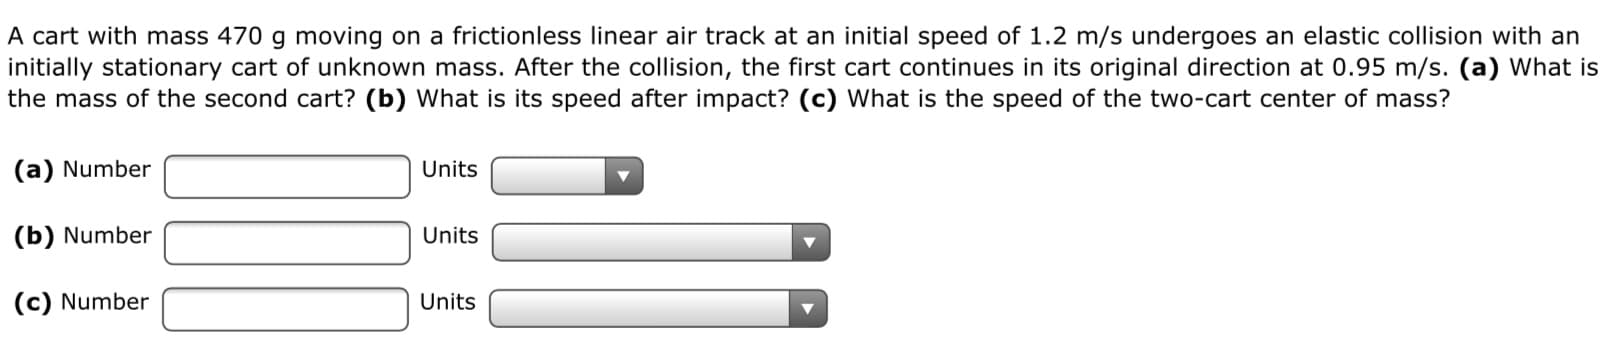 A cart with mass 470 g moving on a frictionless linear air track at an initial speed of 1.2 m/s undergoes an elastic collision with an
initially stationary cart of unknown mass. After the collision, the first cart continues in its original direction at 0.95 m/s. (a) What is
the mass of the second cart? (b) What is its speed after impact? (c) What is the speed of the two-cart center of mass?
(a) Number
Units
(b) Number
Units
(c) Number
Units
